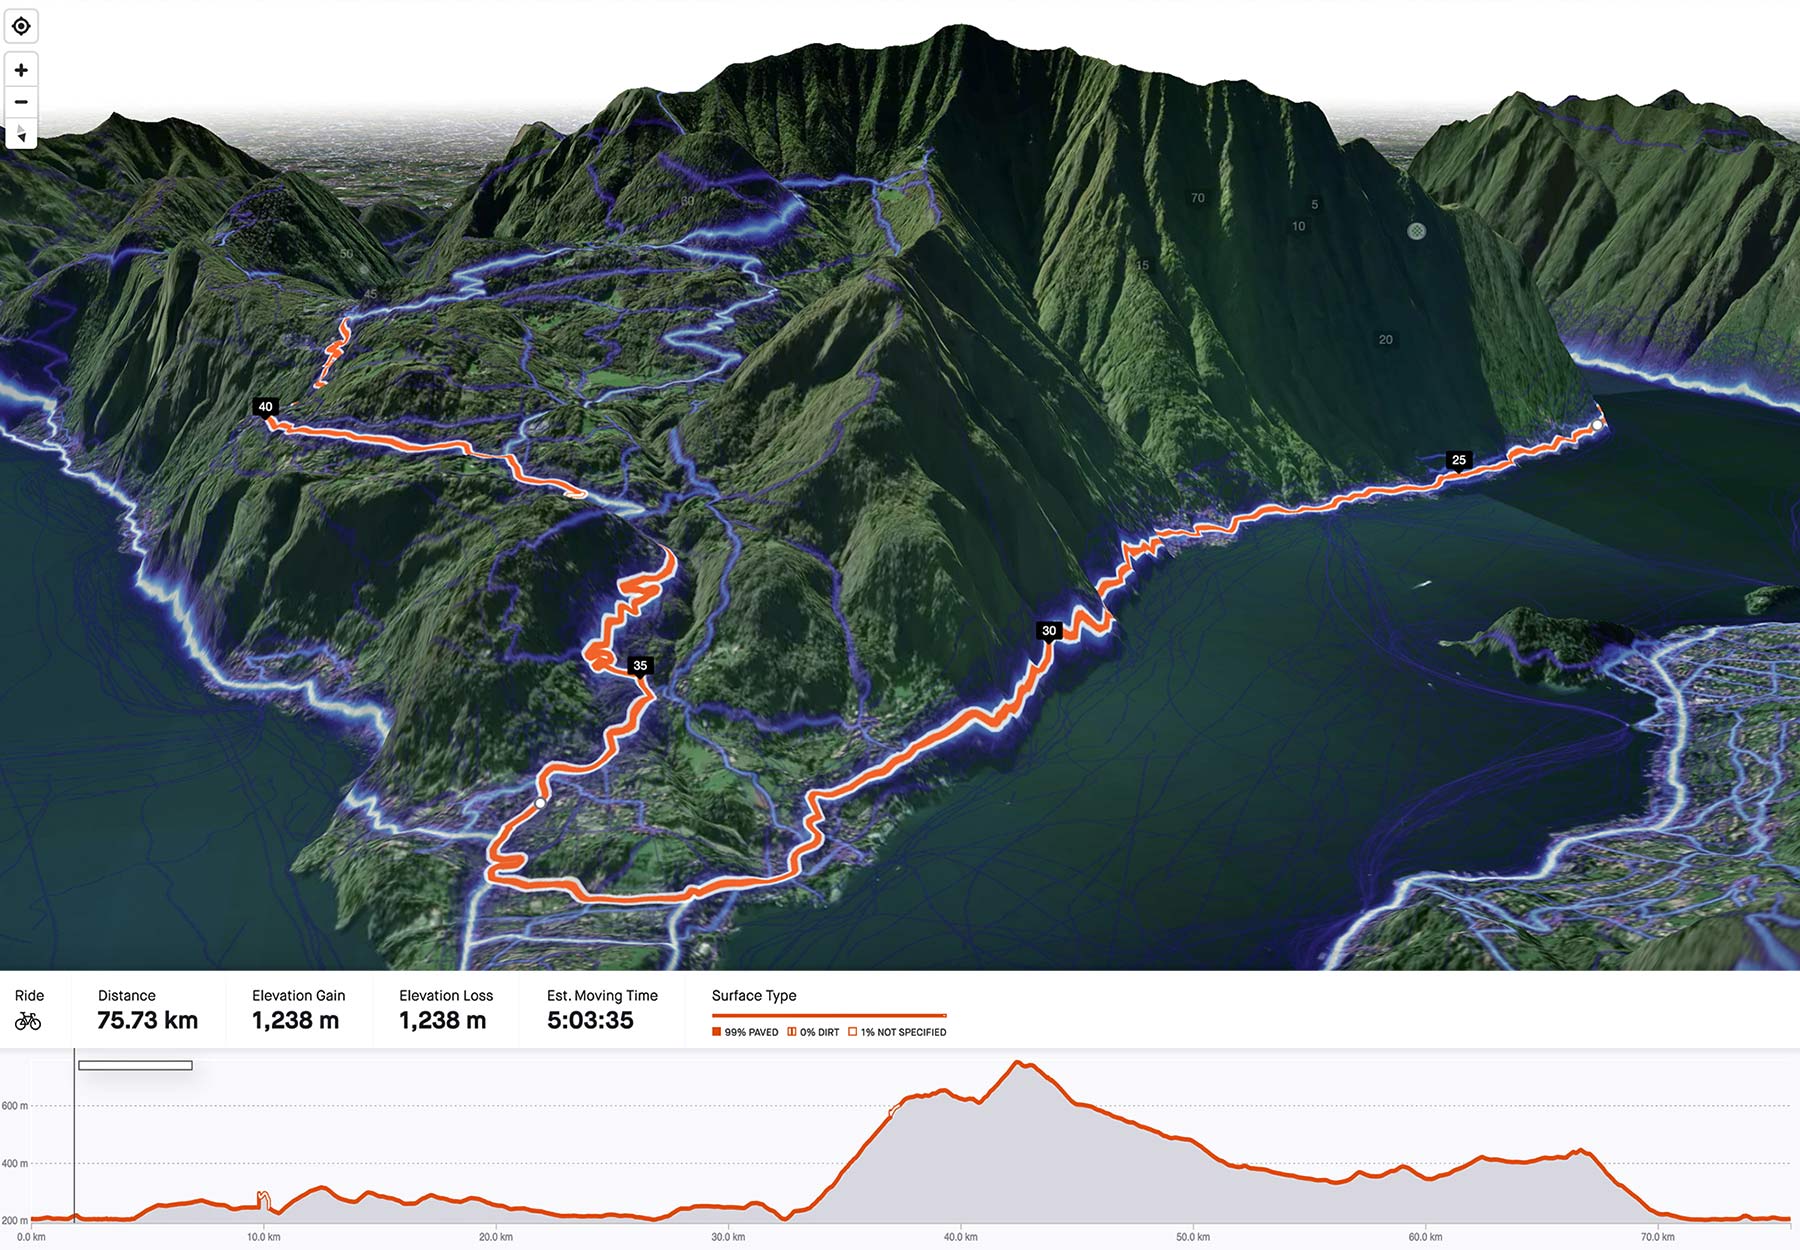 Strava 3D Terrain Route Builder view for subscribers, Ghisallo